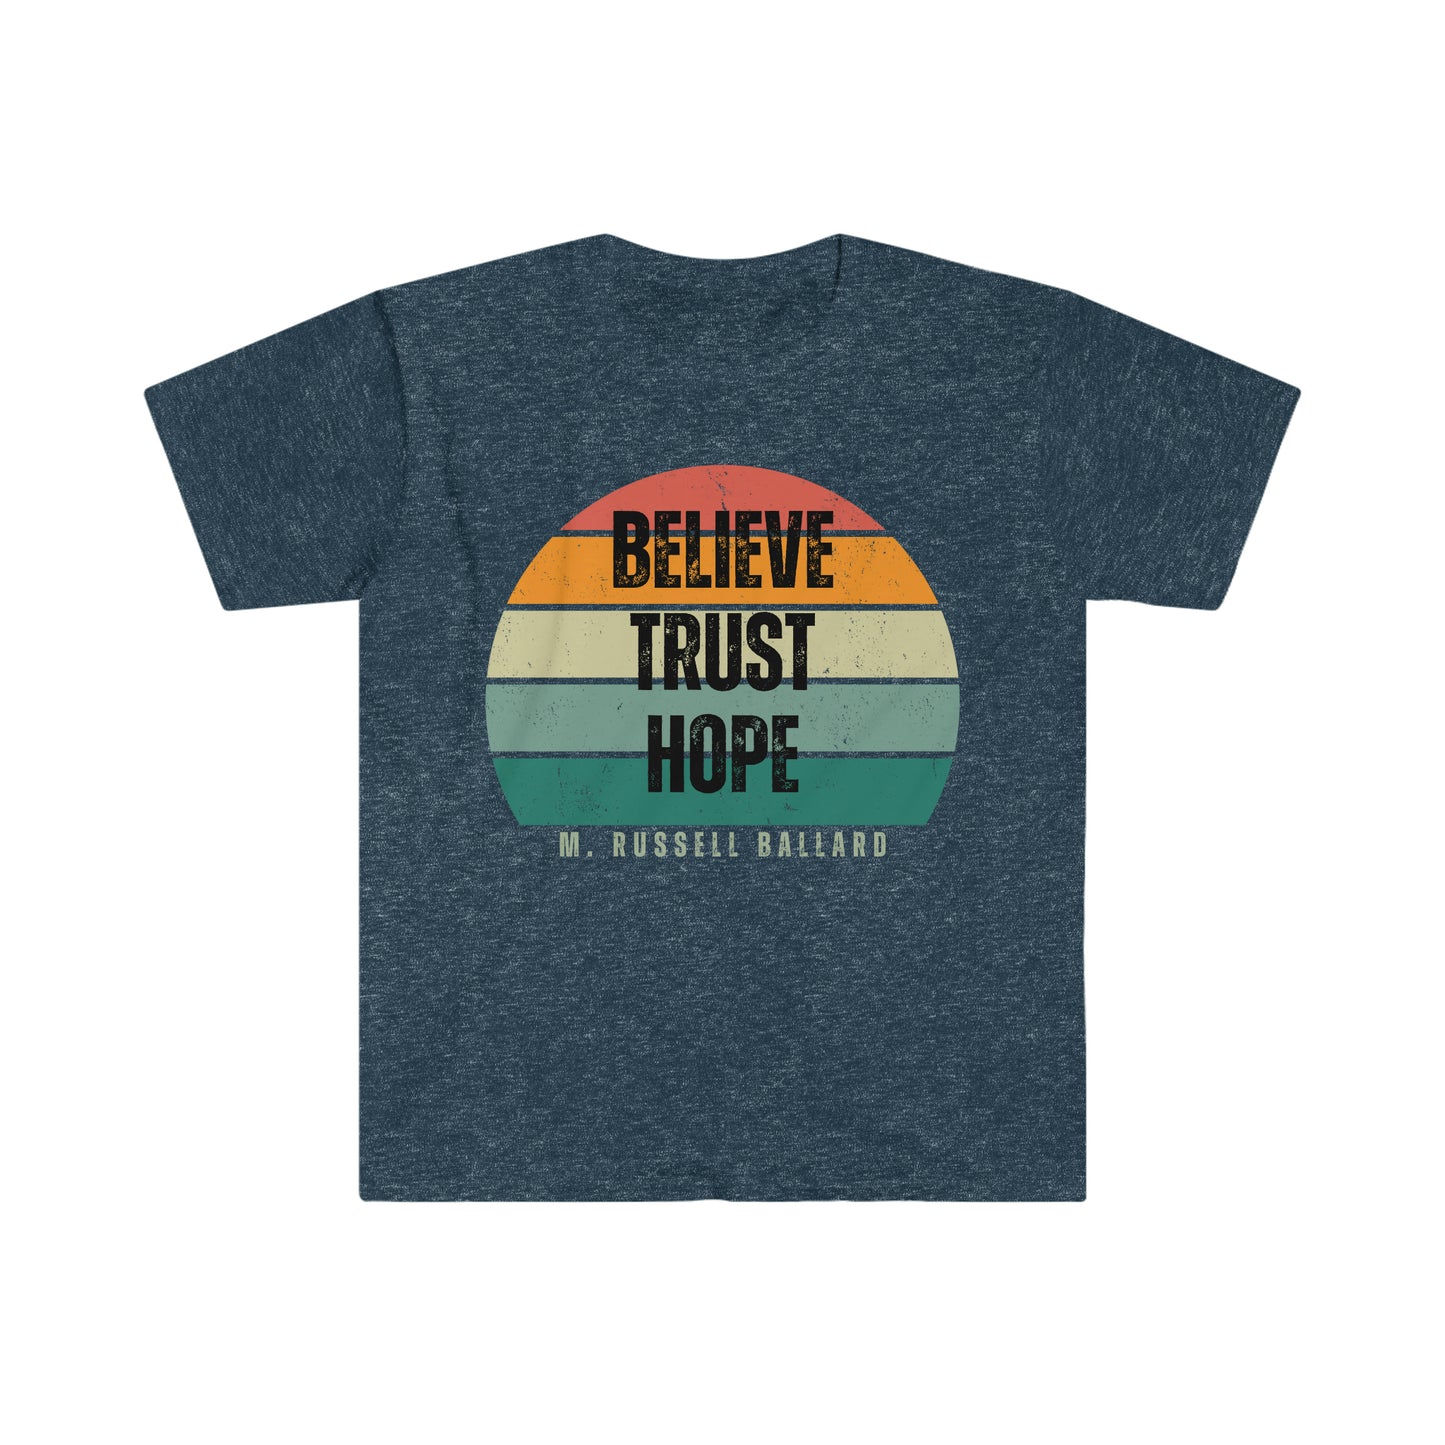 Unisex Softstyle T-Shirt, Believe, Trust, Hope T-Shirt, Religious Shirt, Christian Shirt, Christian Gift, LDS Ministering Gift